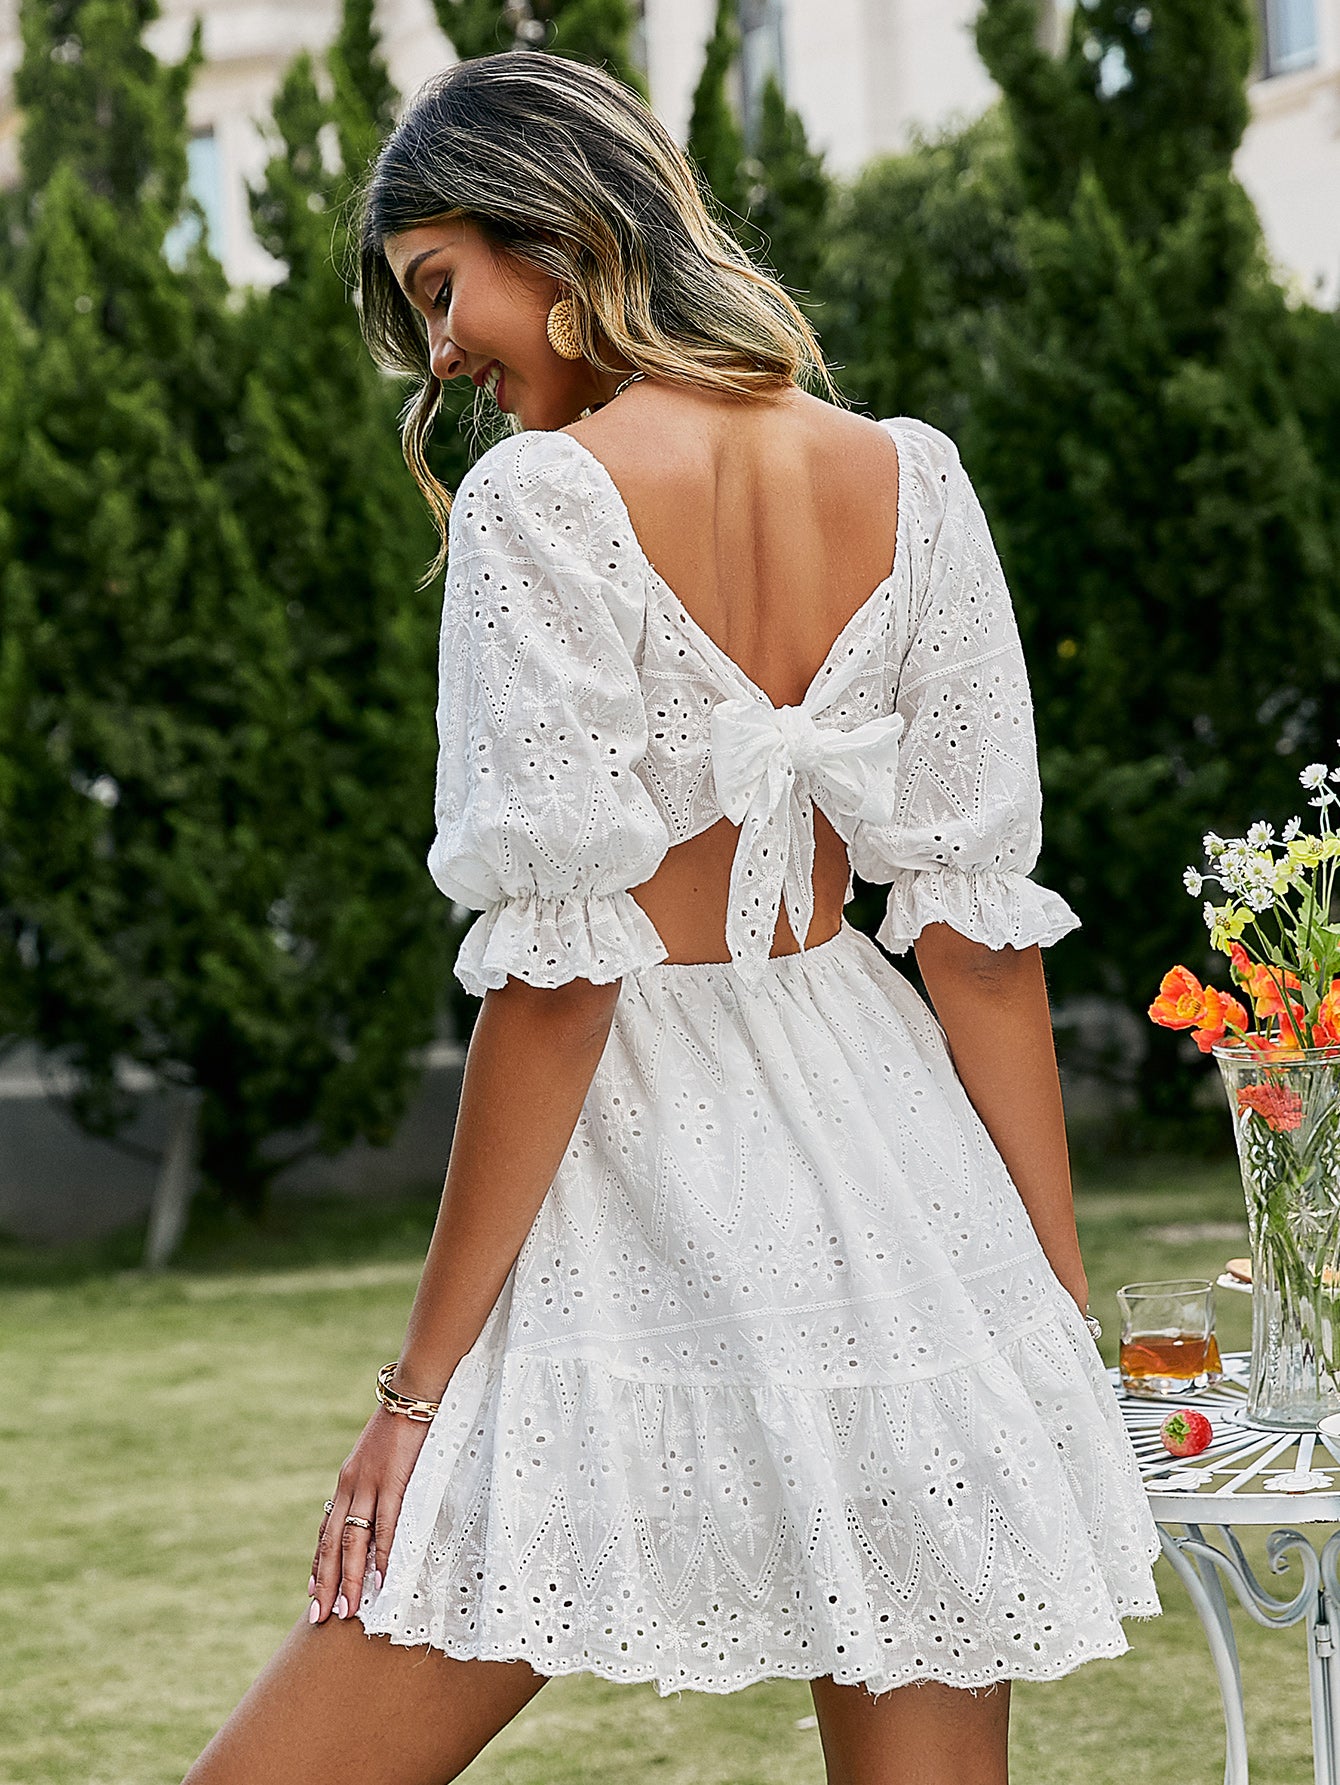 Simplee Lace up hollow out knot summer white dress women Holiday casual high waist ruffled mini dresses A-line frills vestido